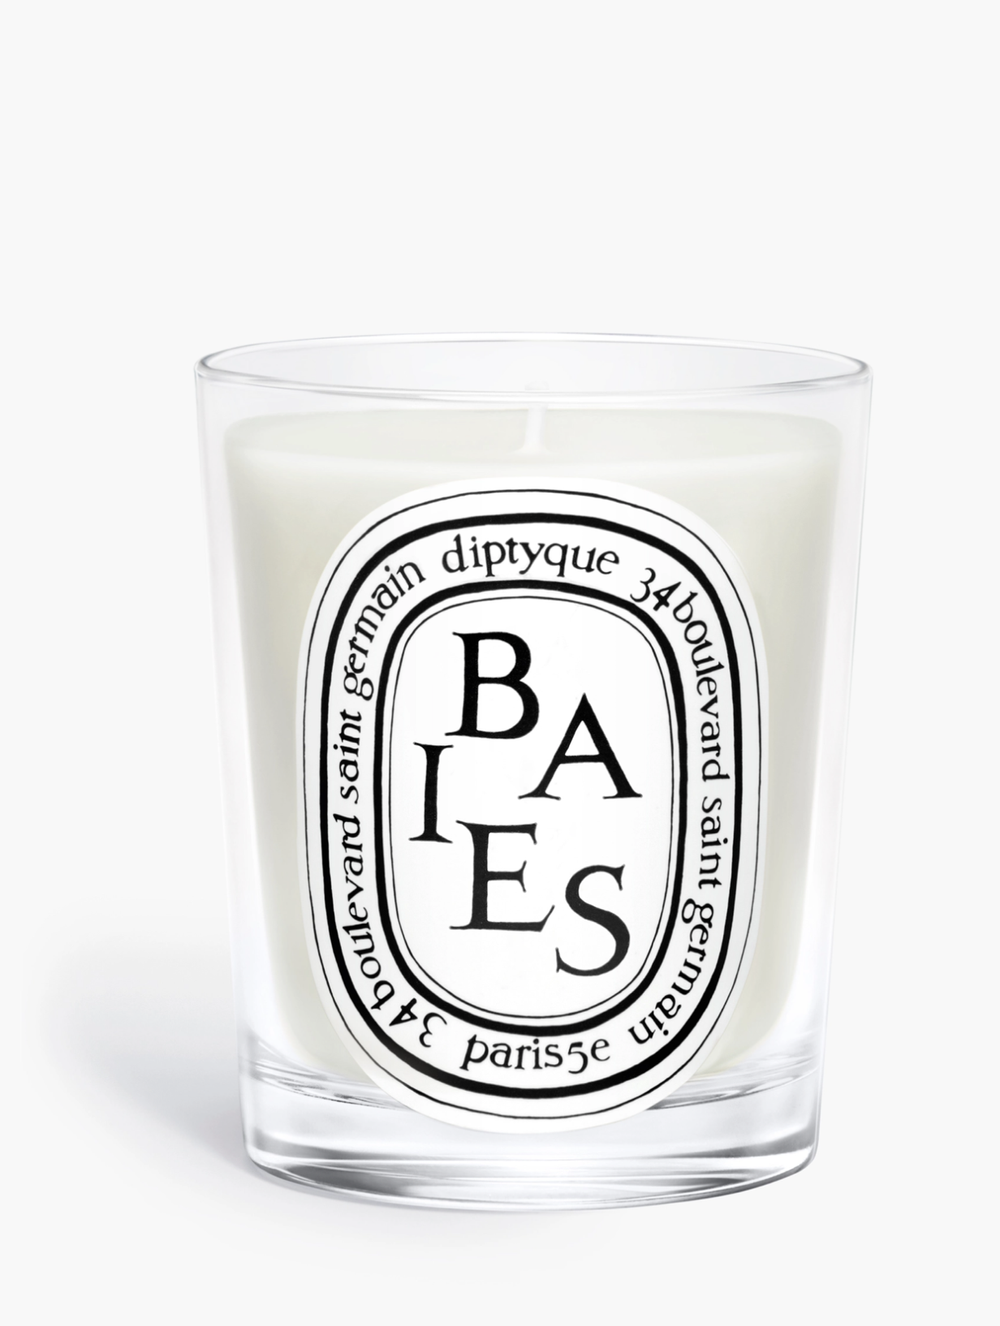 Diptyque Candle, $74